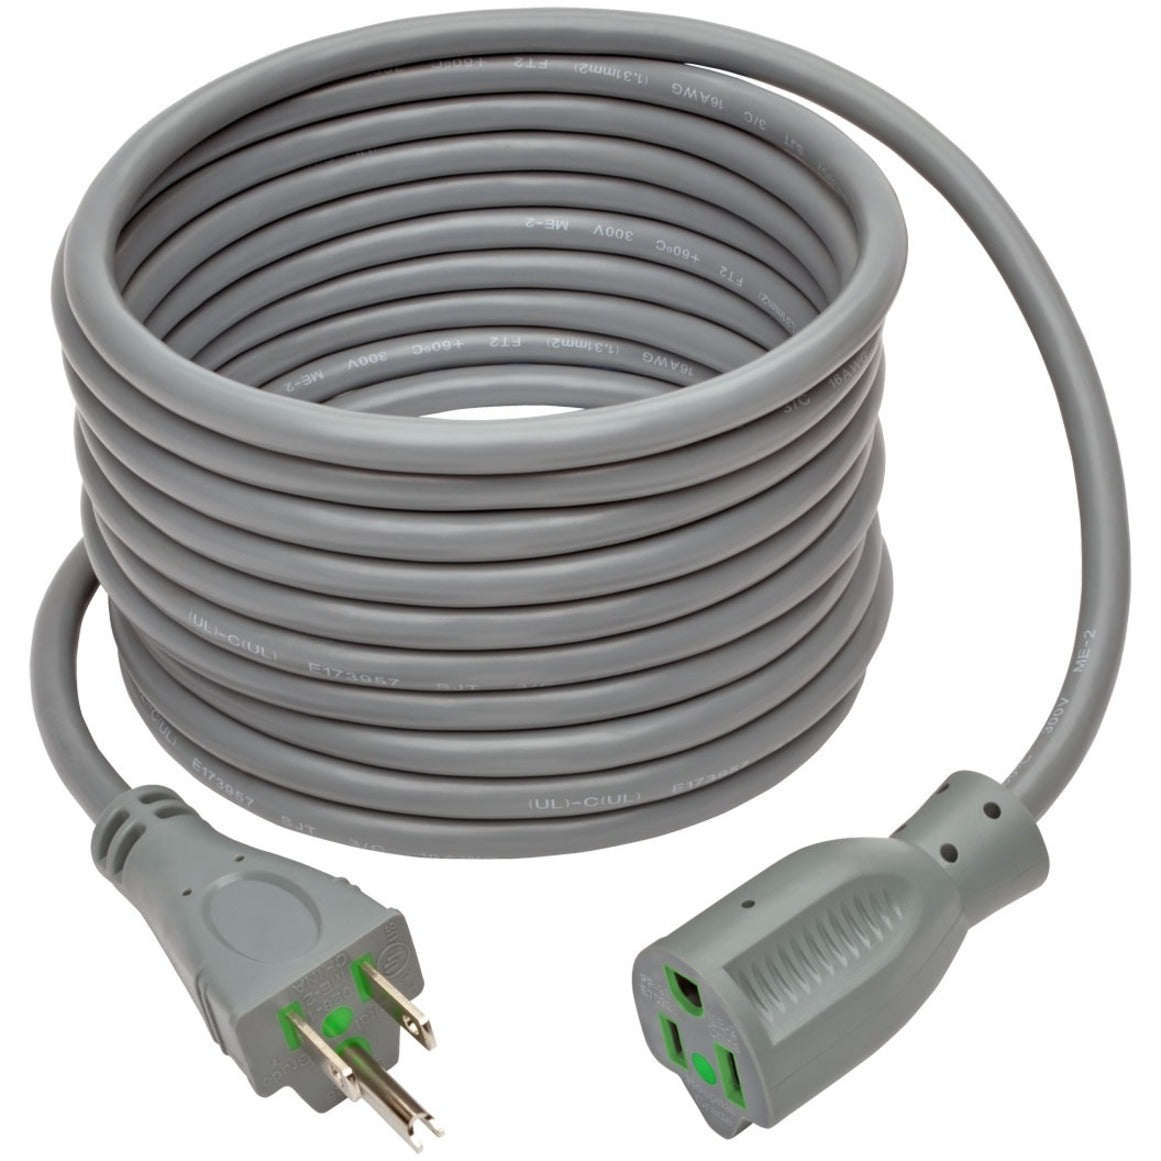 Tripp Lite P022-015-GY-HG Power Extension Cord, 13A 125V AC, 15 ft, Gray, Lifetime Warranty, RoHS & REACH Certified